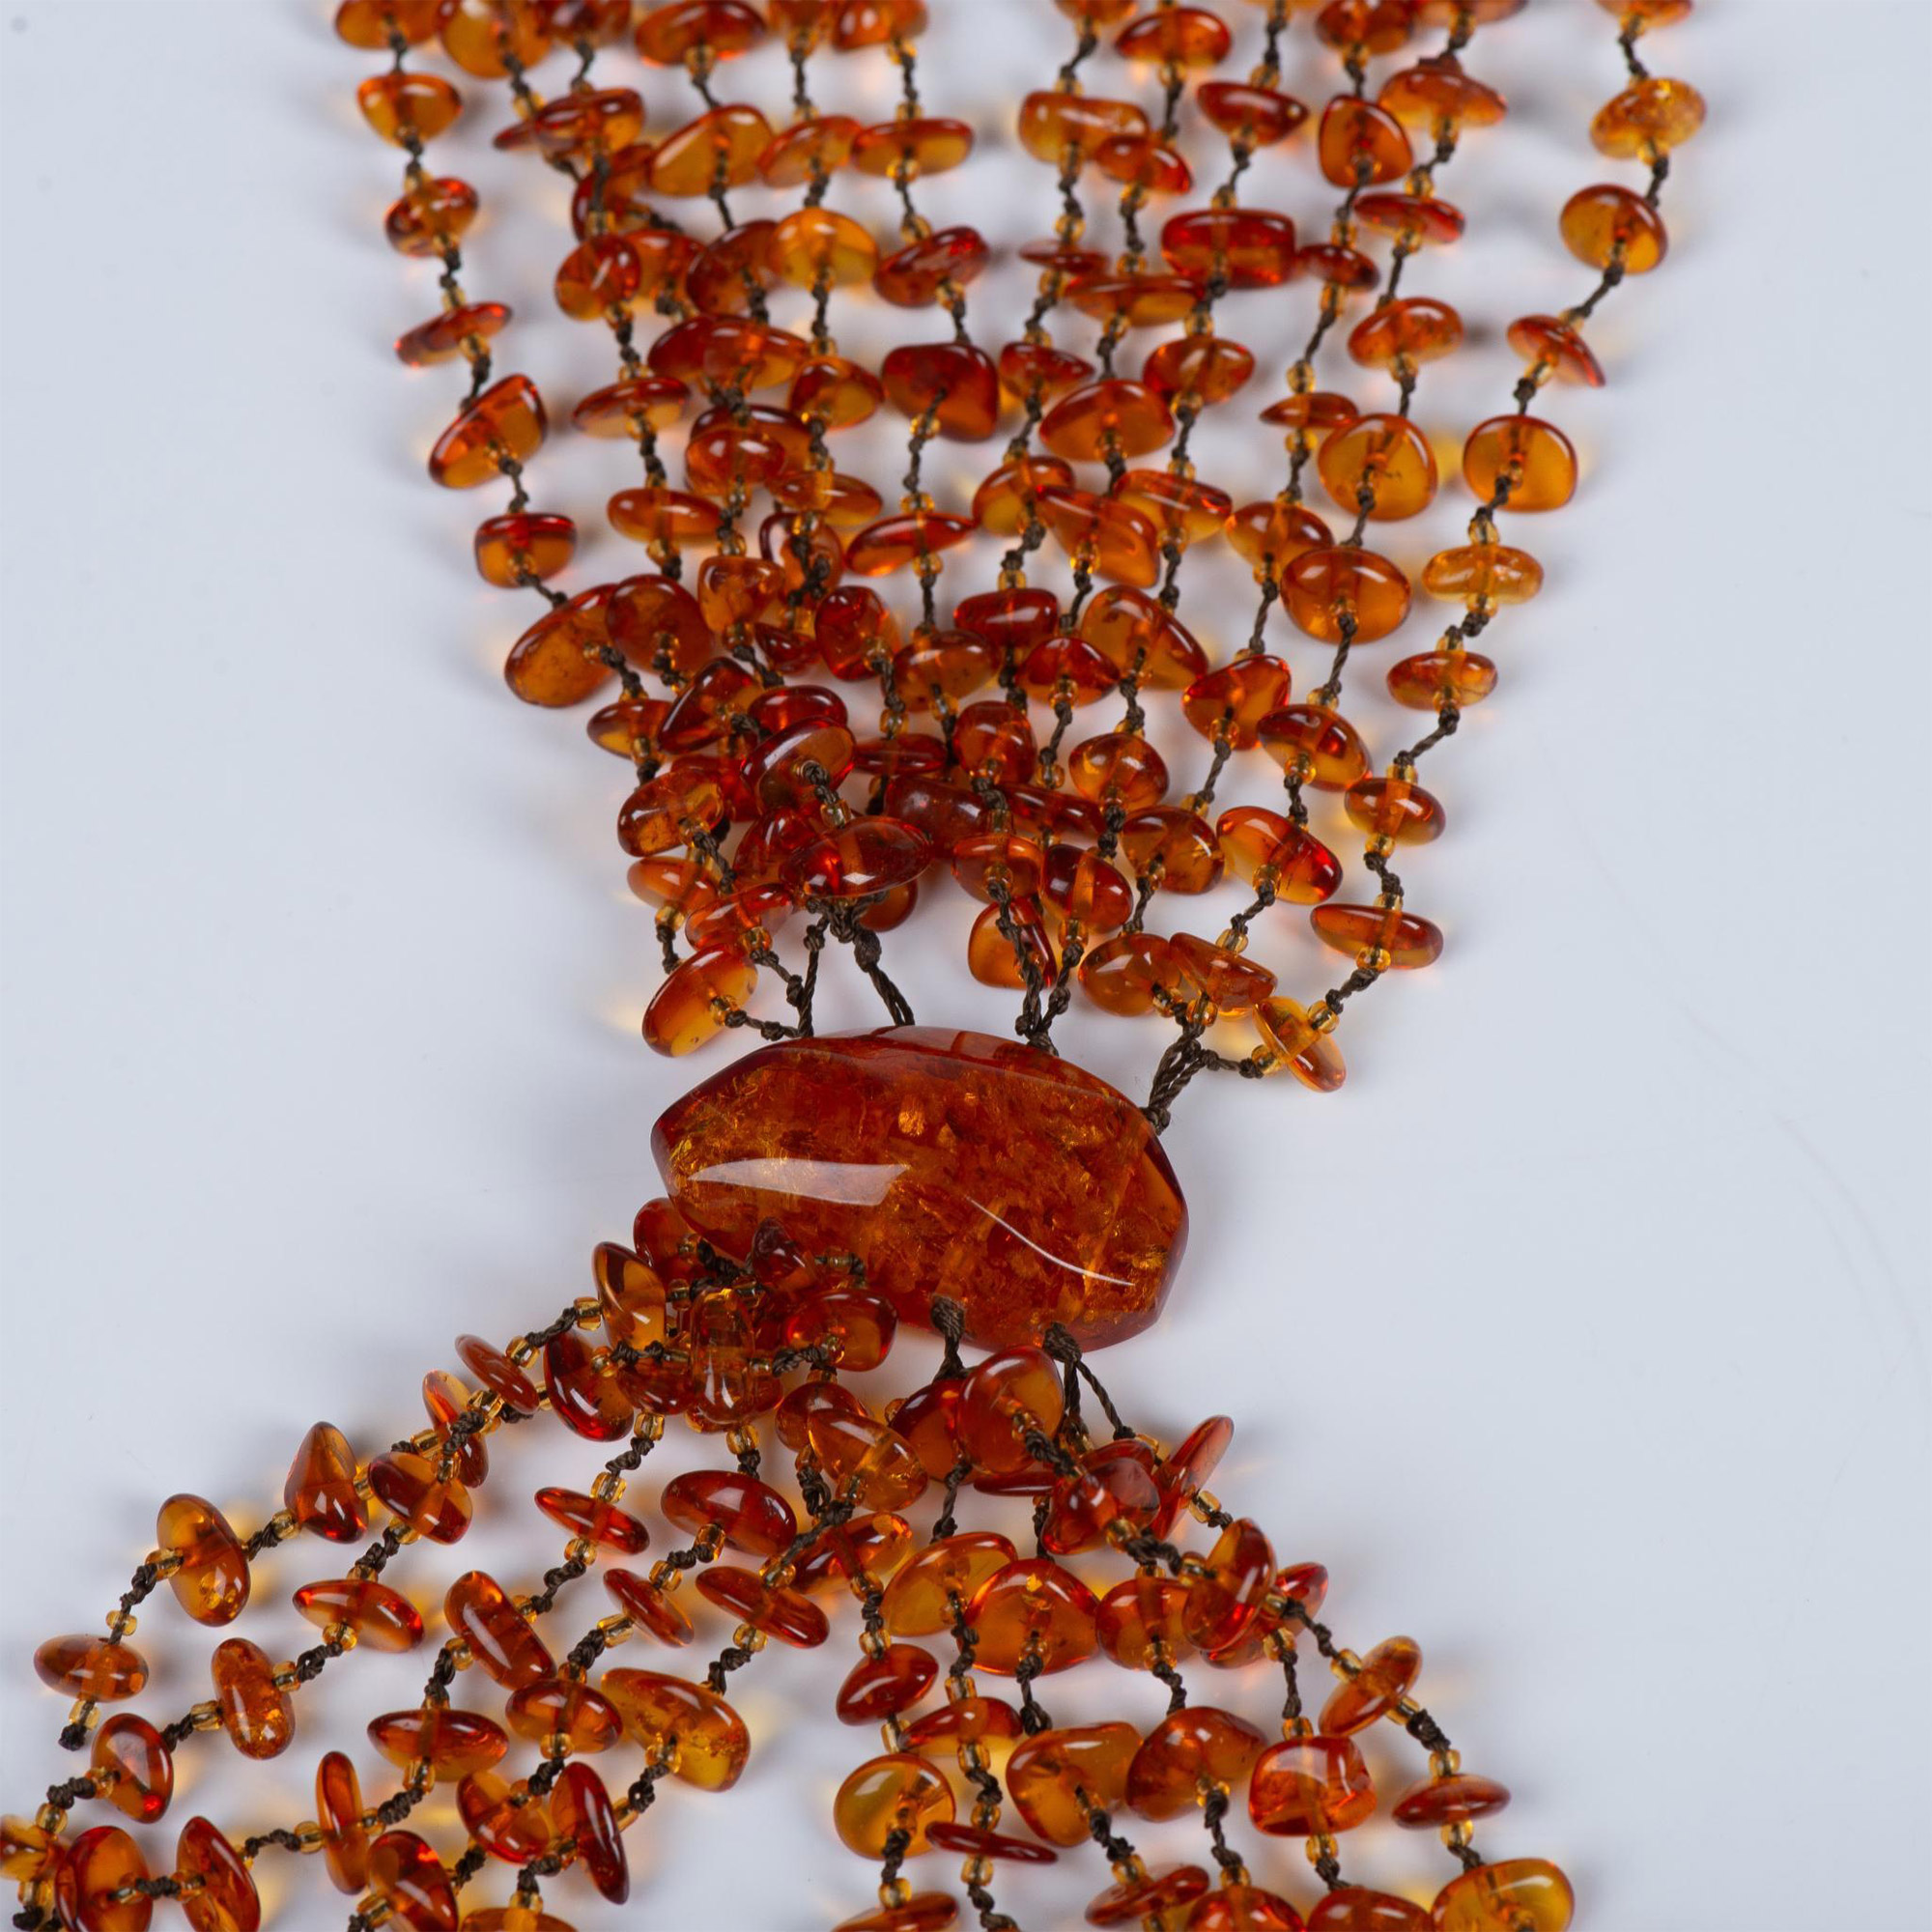 Russian Amber 6 Strand Necklace with Solid Stone Pendant - Image 3 of 4